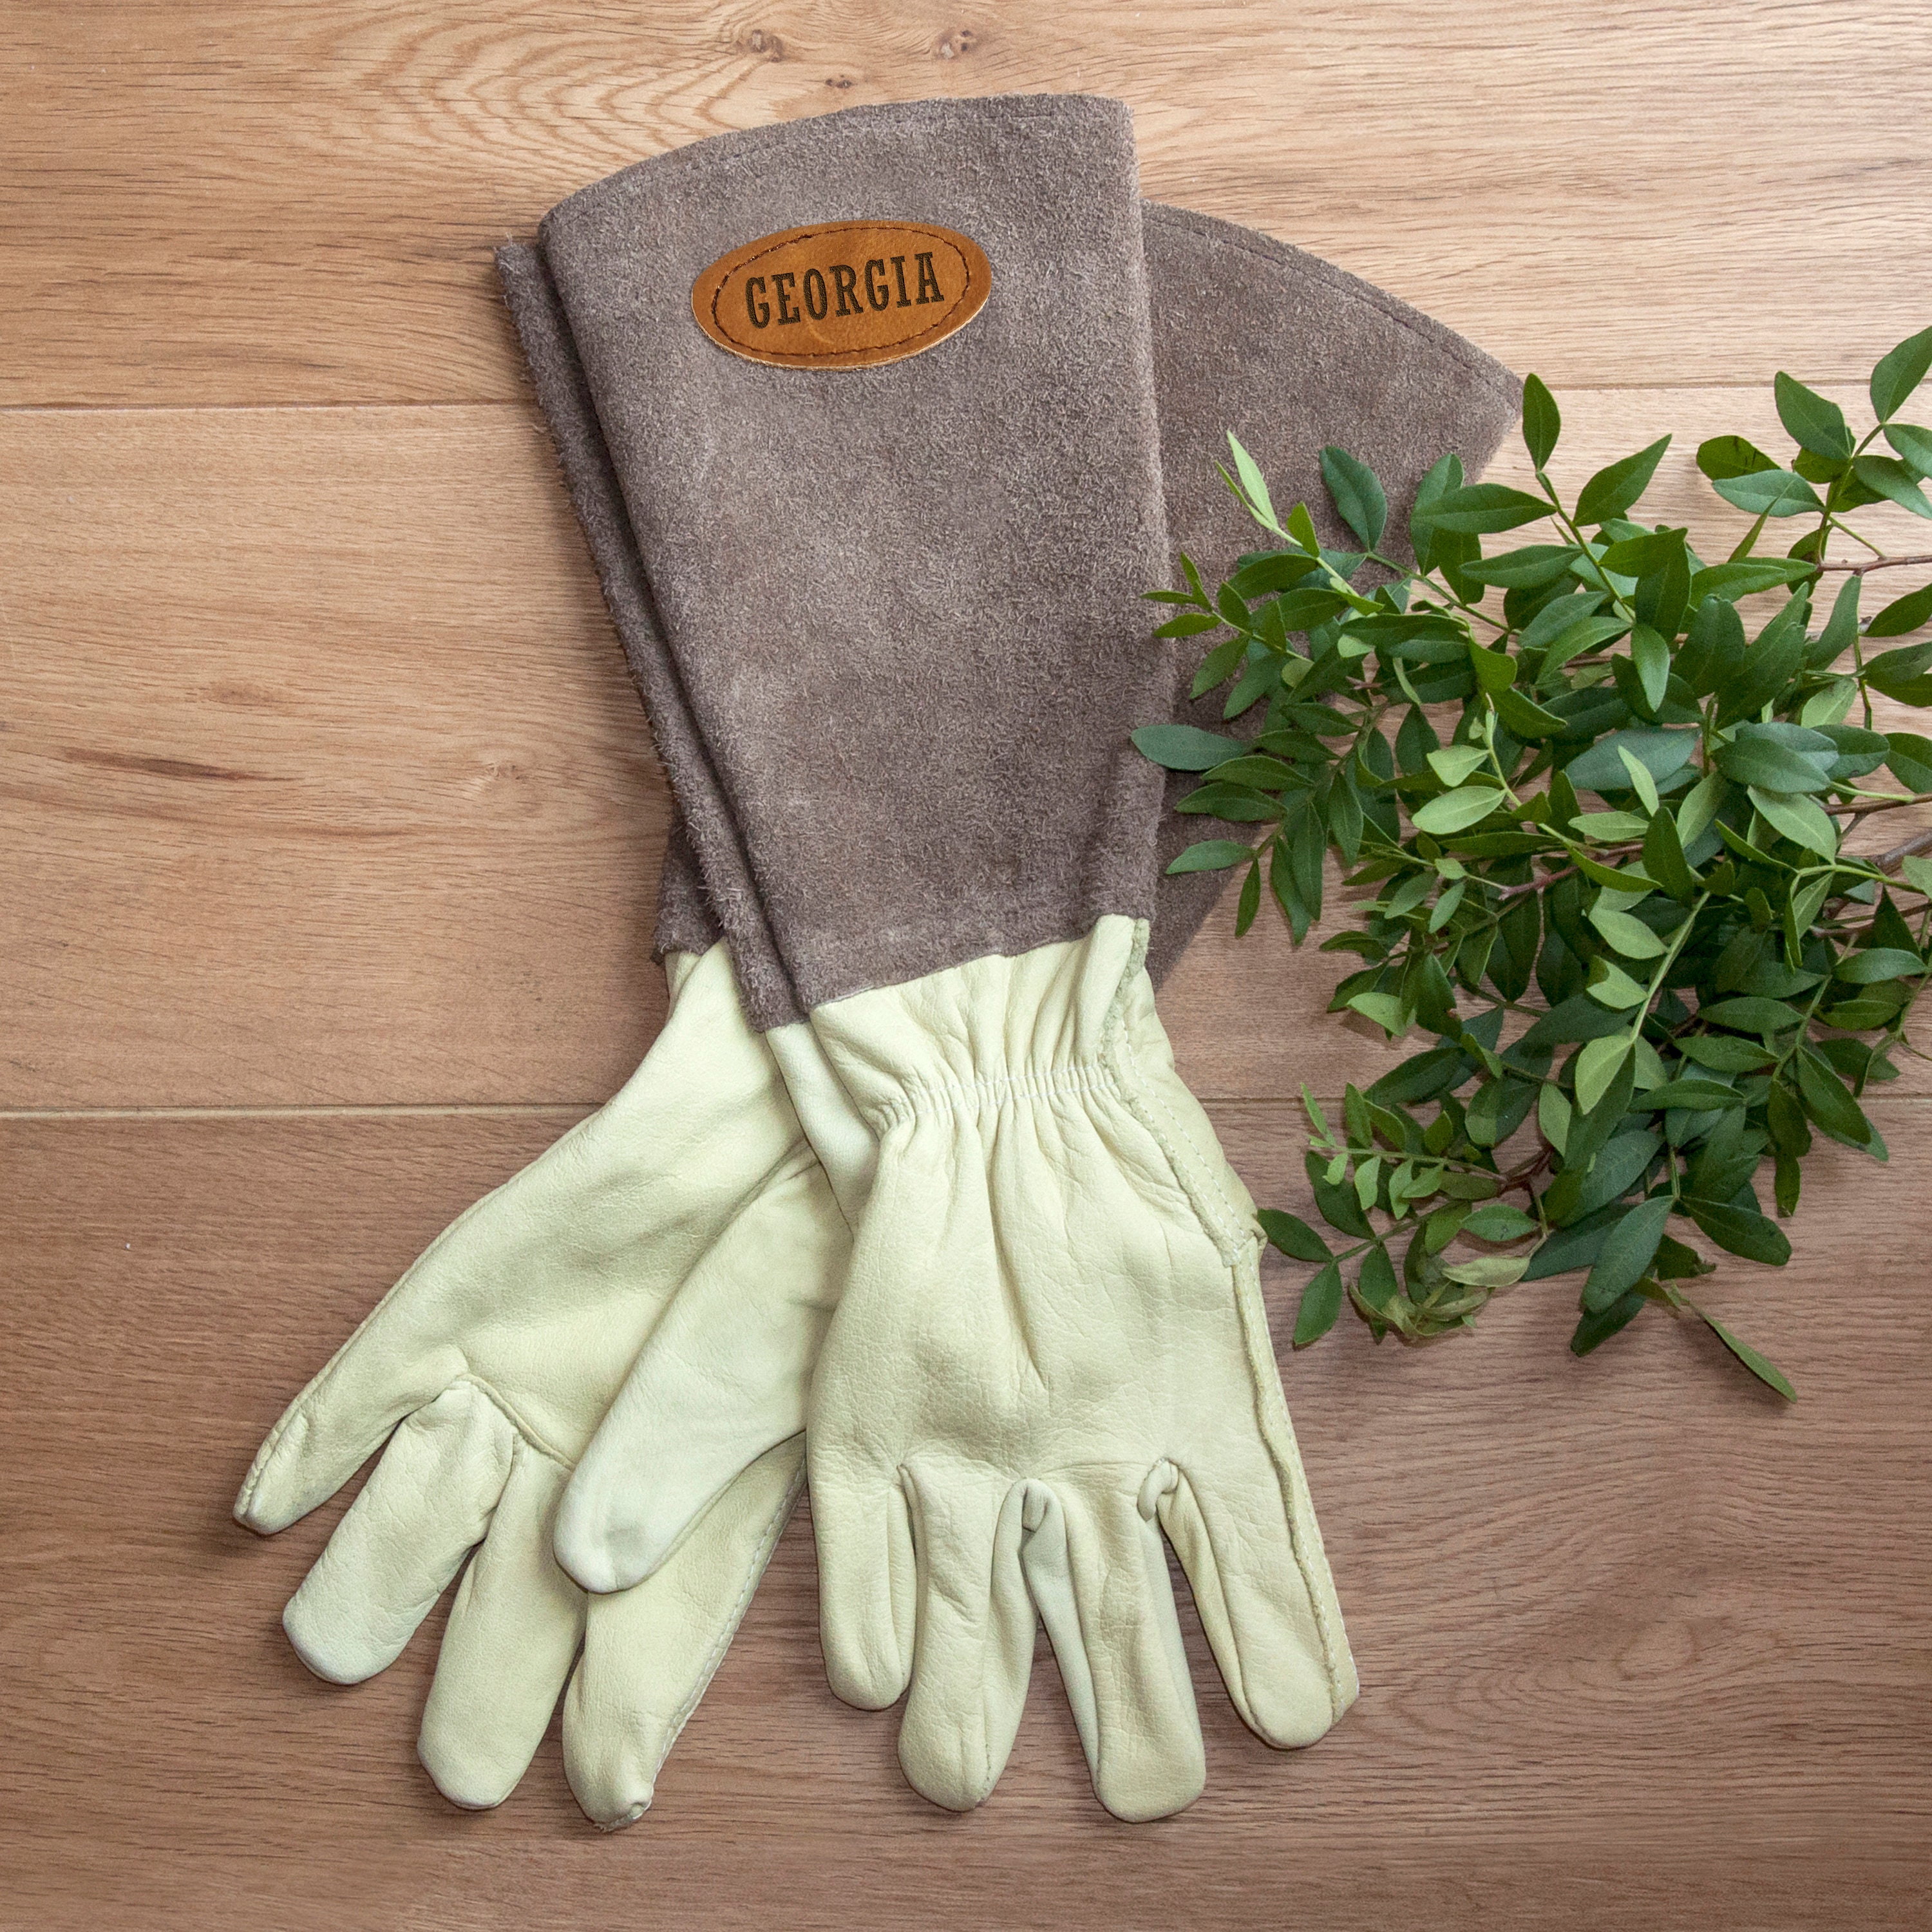 Mother's Day Gifts for Gardeners Nan Gift Plant Parents Green Fingers Present Customised Gloves Home & Living Outdoor & Gardening Garden Gloves & Aprons Personalised Message Gardening Gloves 